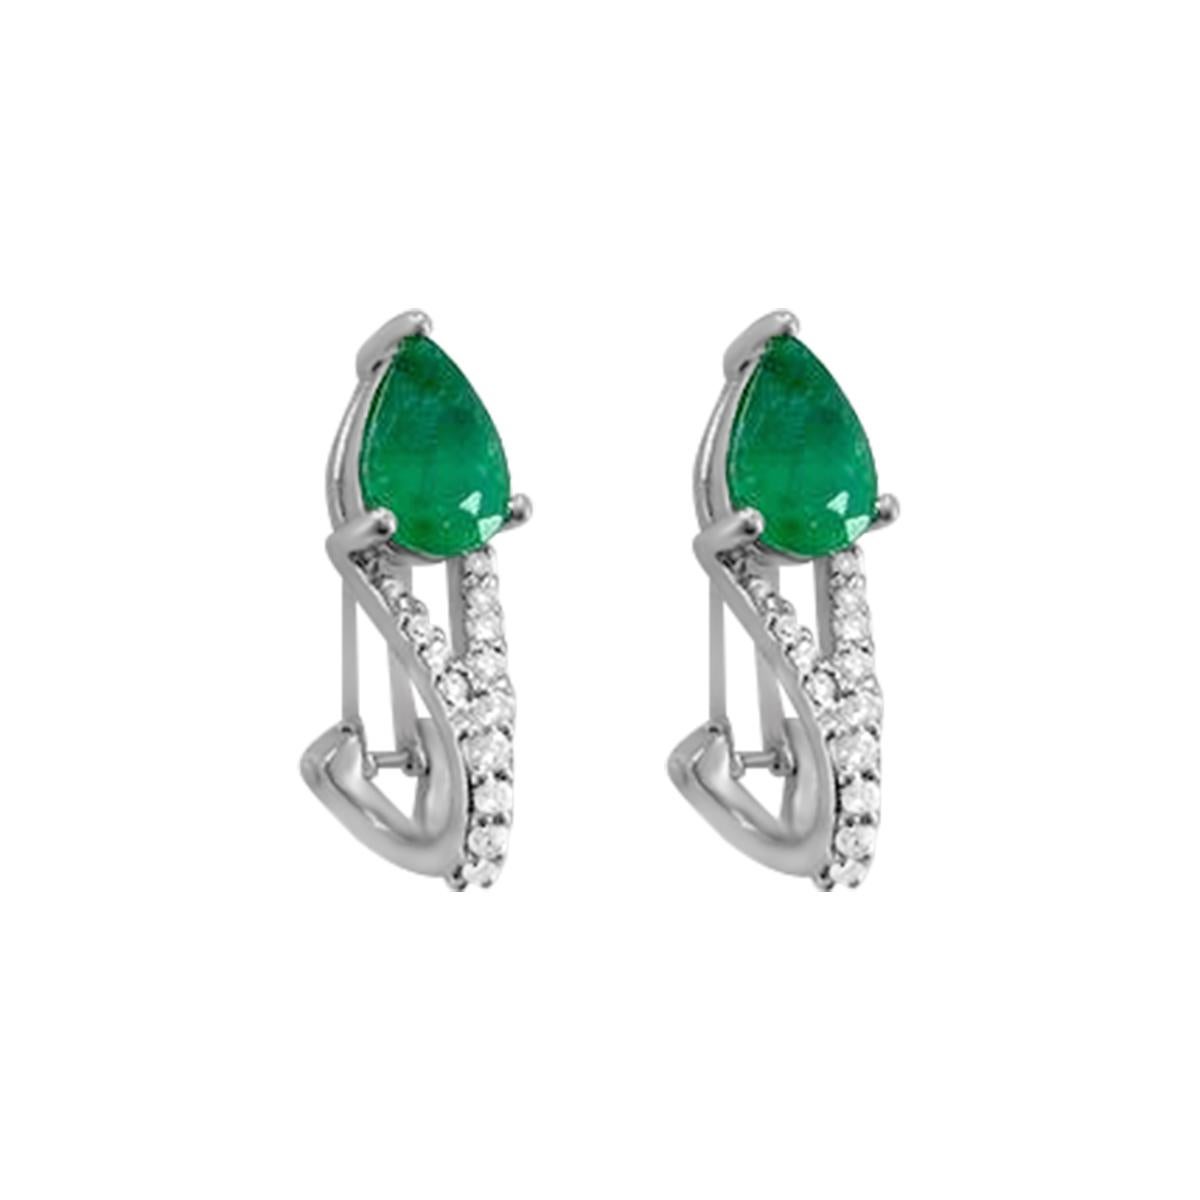 An Eye Catching Combination Of The Vibrant Emerald And Diamond Cluster Make These Stud Earring The Perfect Gift For Any Ocassion.
These Stud Earring Features A Beautiful 7X5mm Pear Cut Emerald In 18K White Gold.



Style# TS1024E
Emerald: Pear 7X5mm